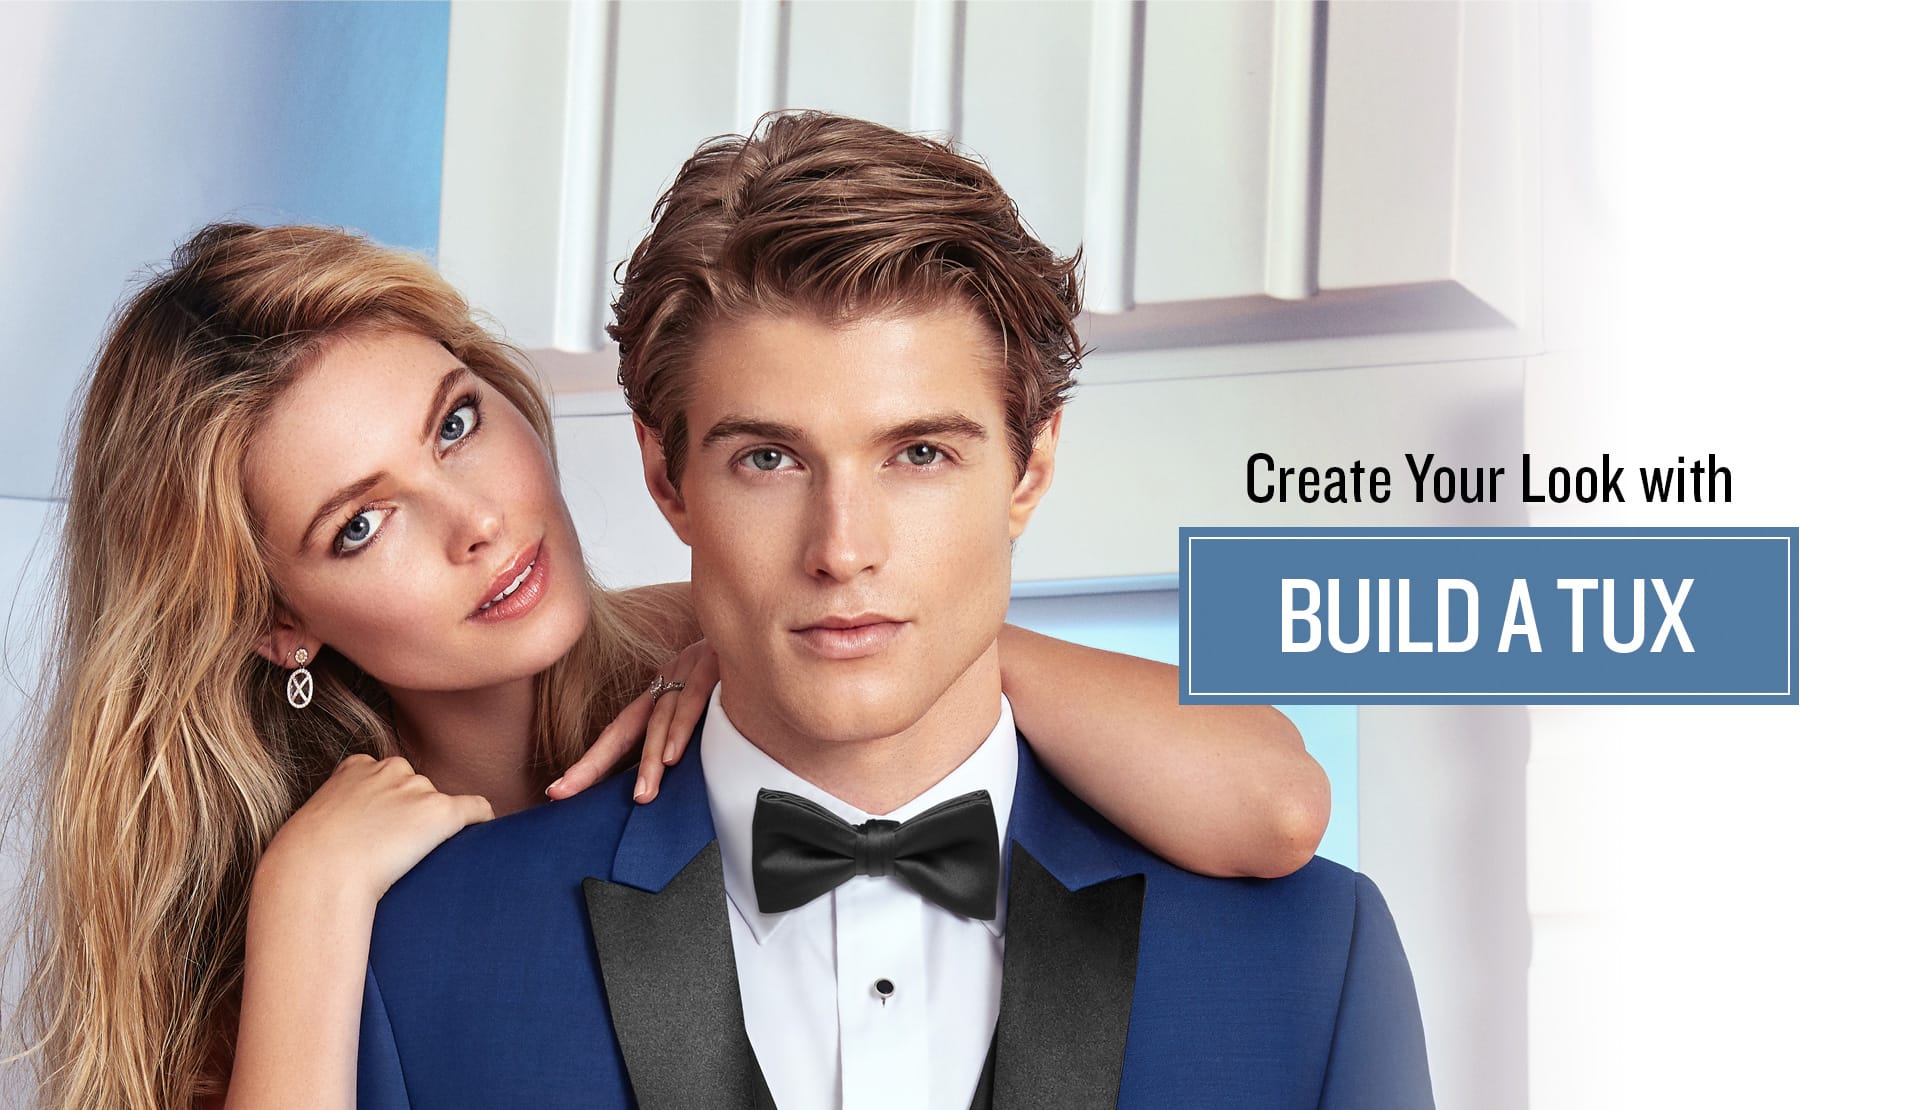 Use Build a Tux to create a tuxedo for your event